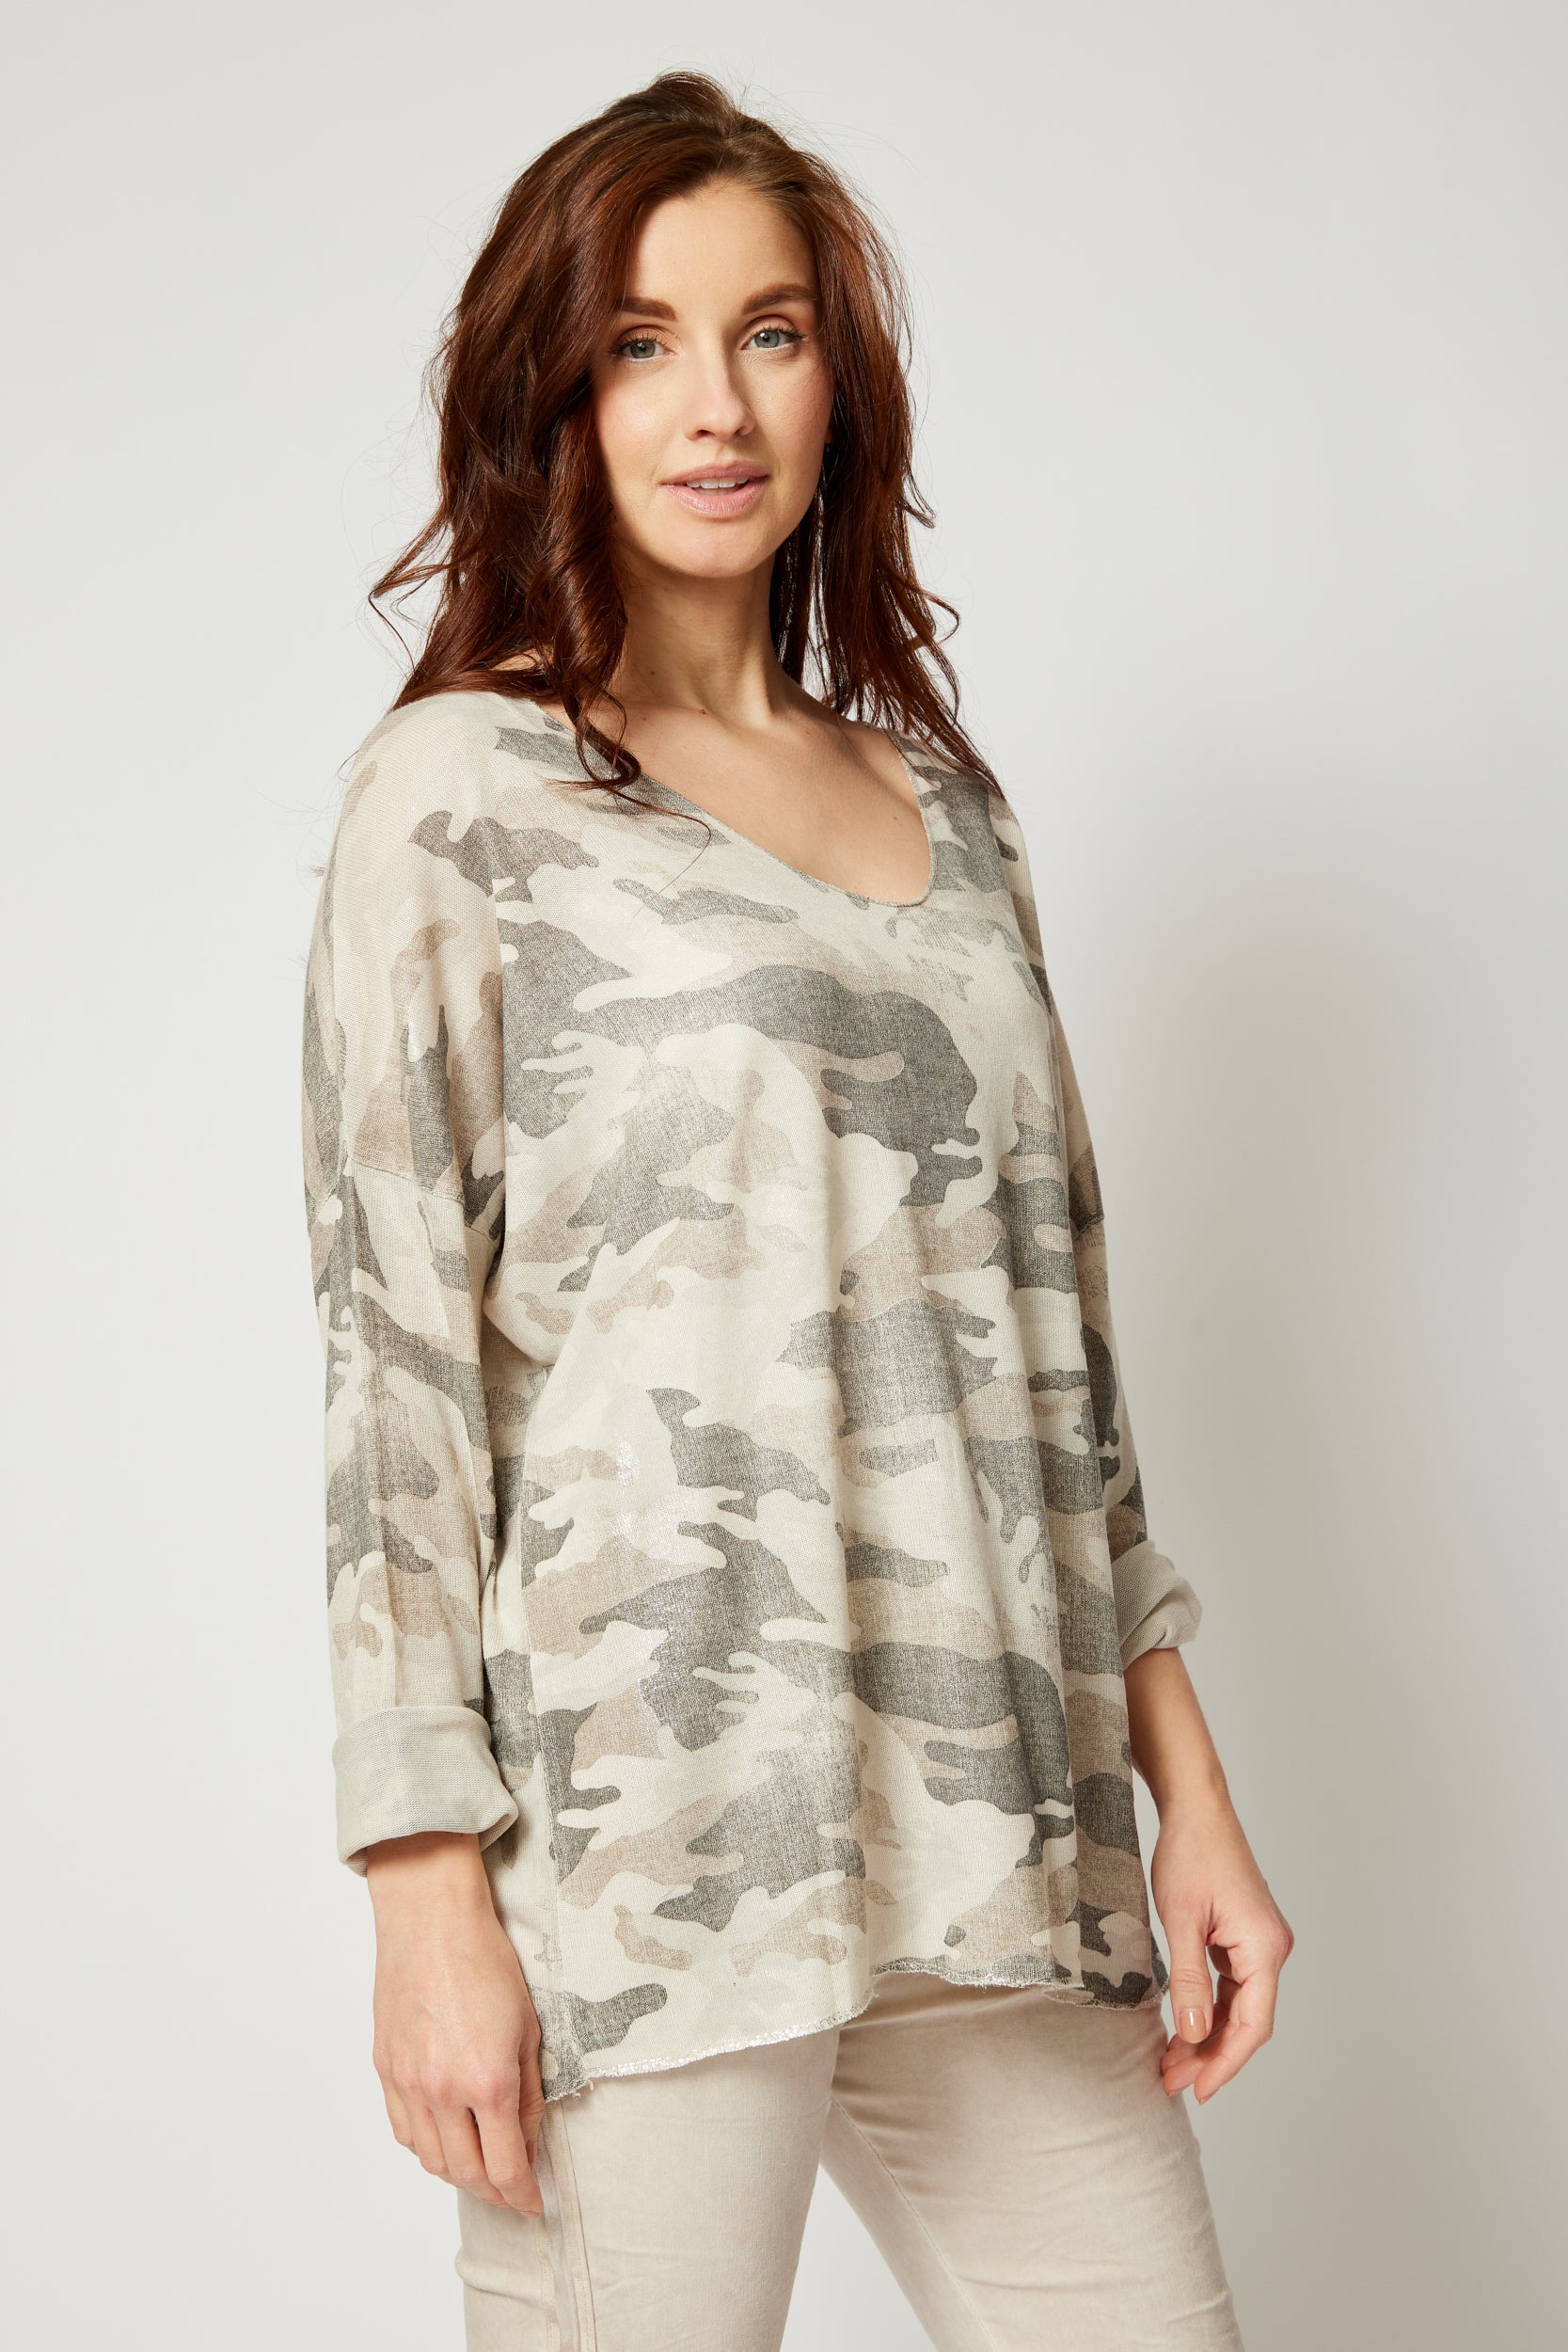 Long Sleeve Shimmer Camo Top (Four Colors) - Jacqueline B Clothing